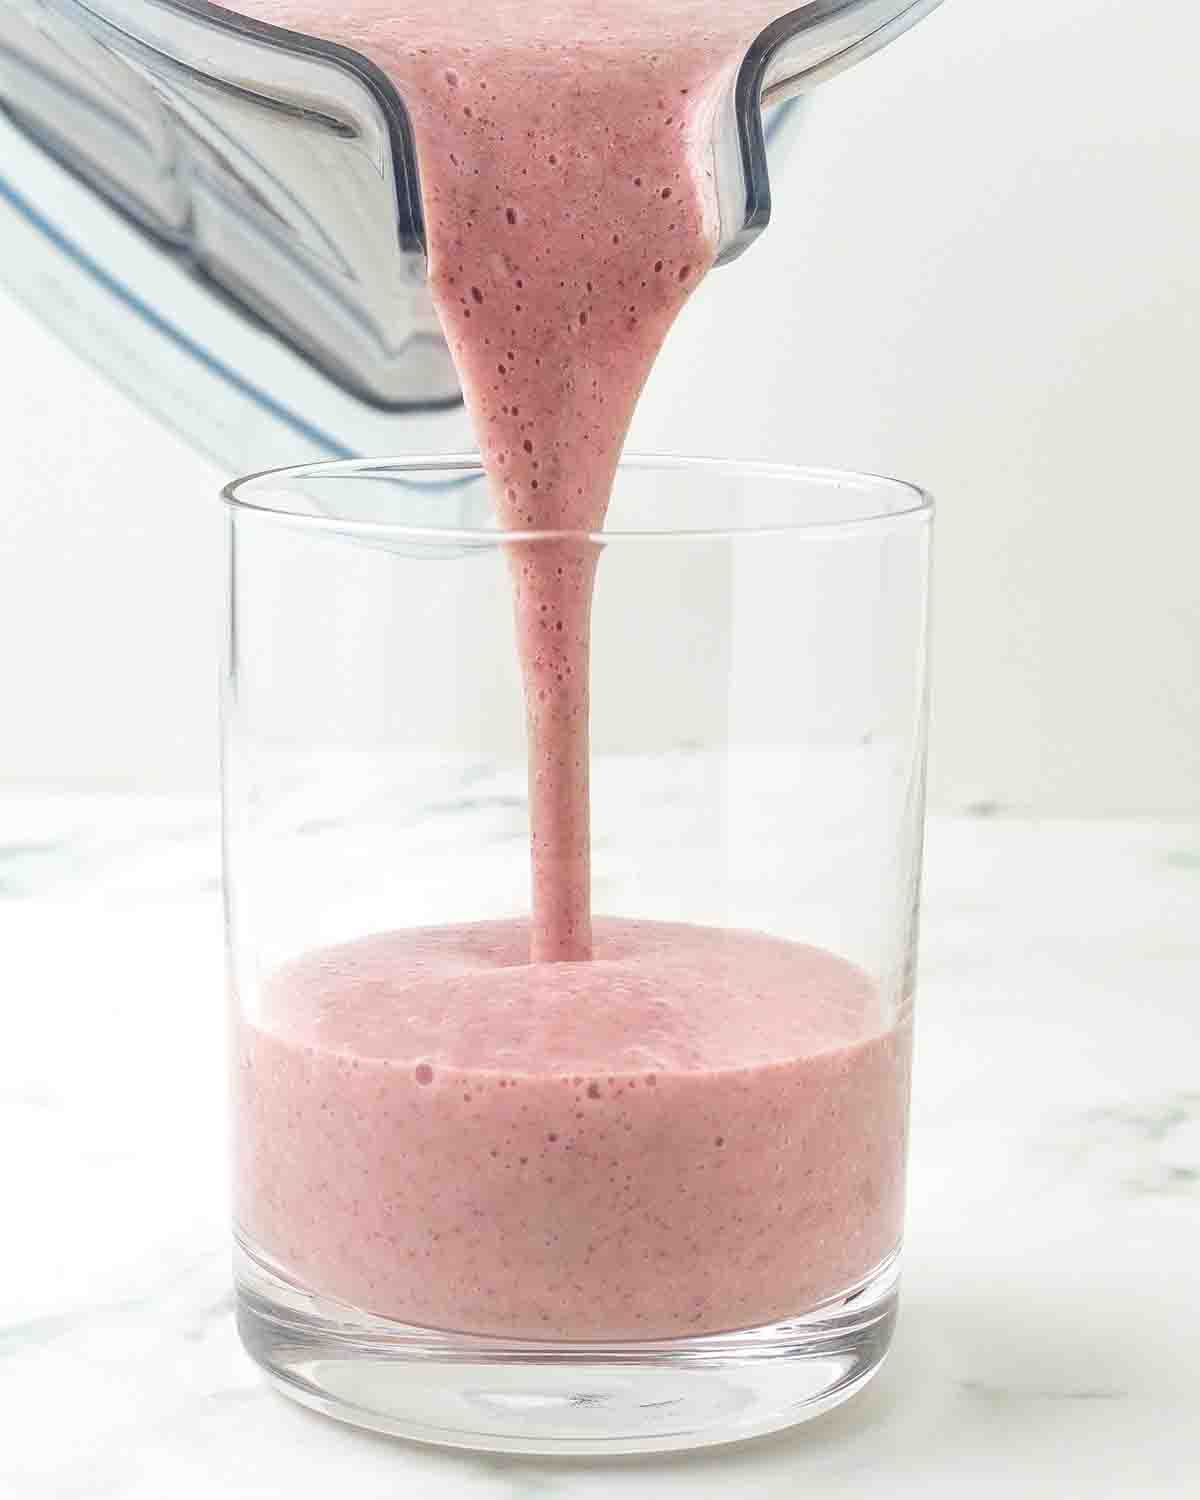 A freshly blended dairy-free cranberry apple smoothie being poured into a glass.